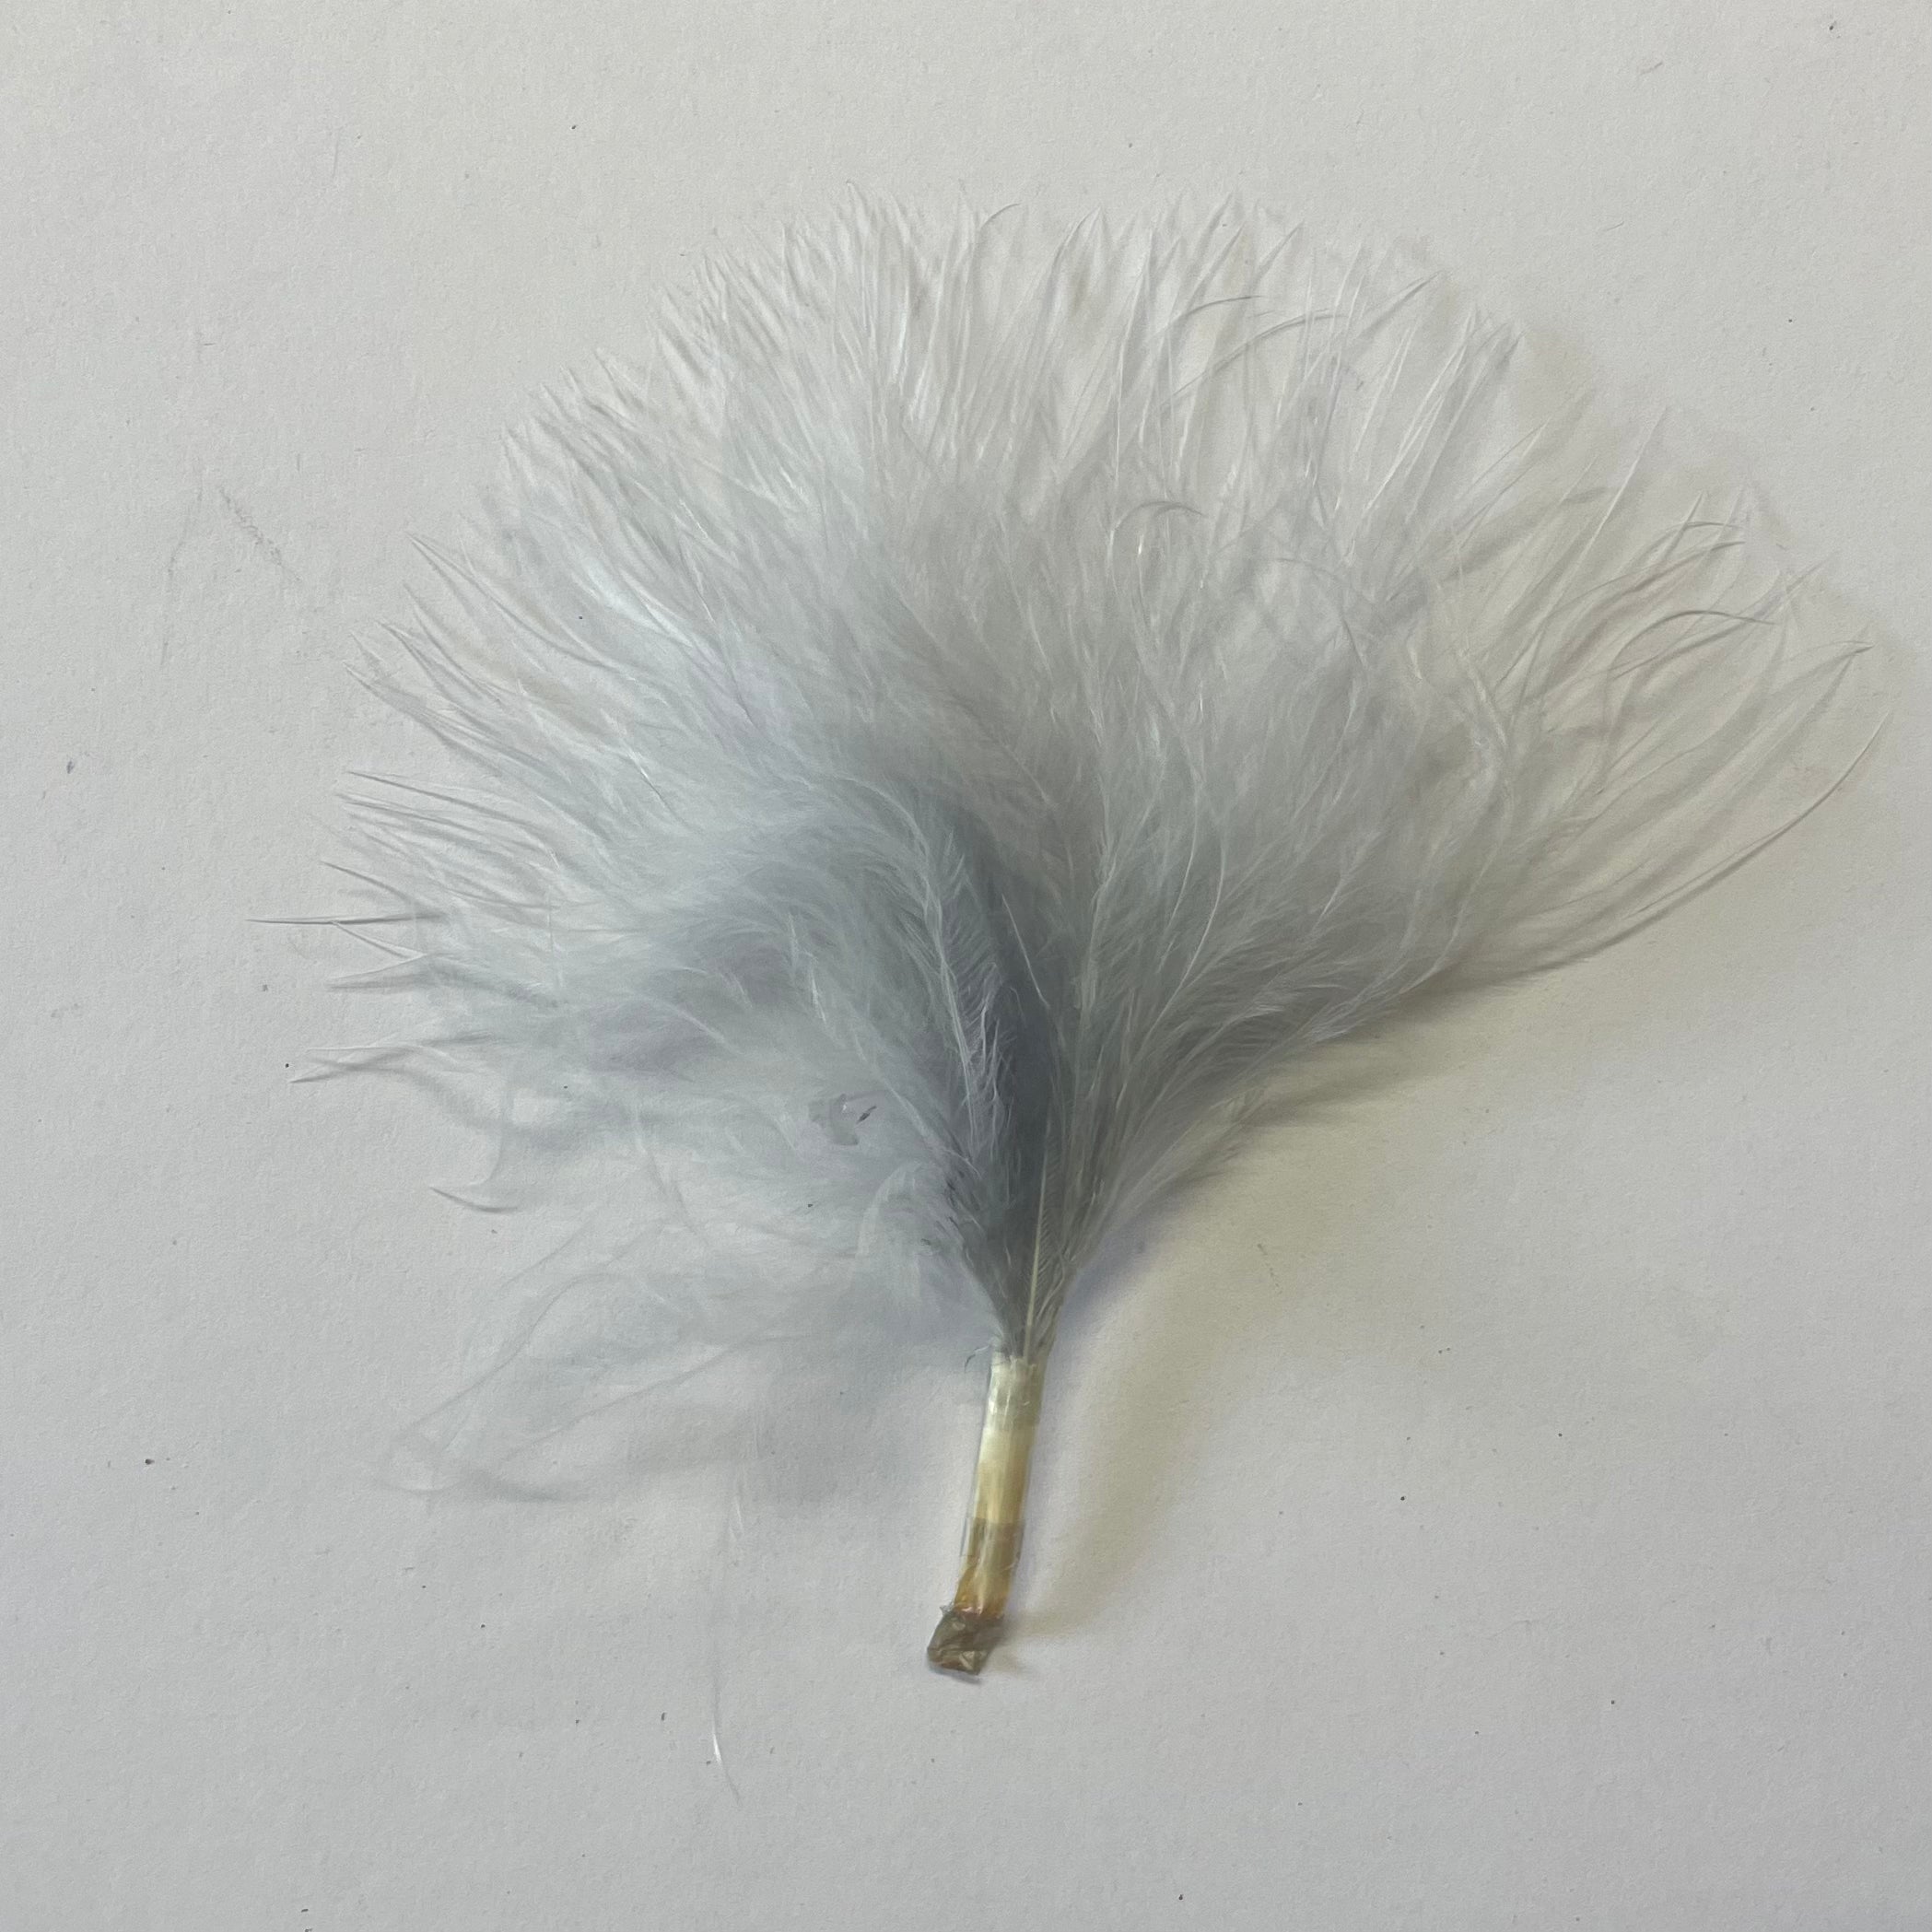 Itty Bitty Marabou Feather Plumage Pack 10 grams - Grey Silver